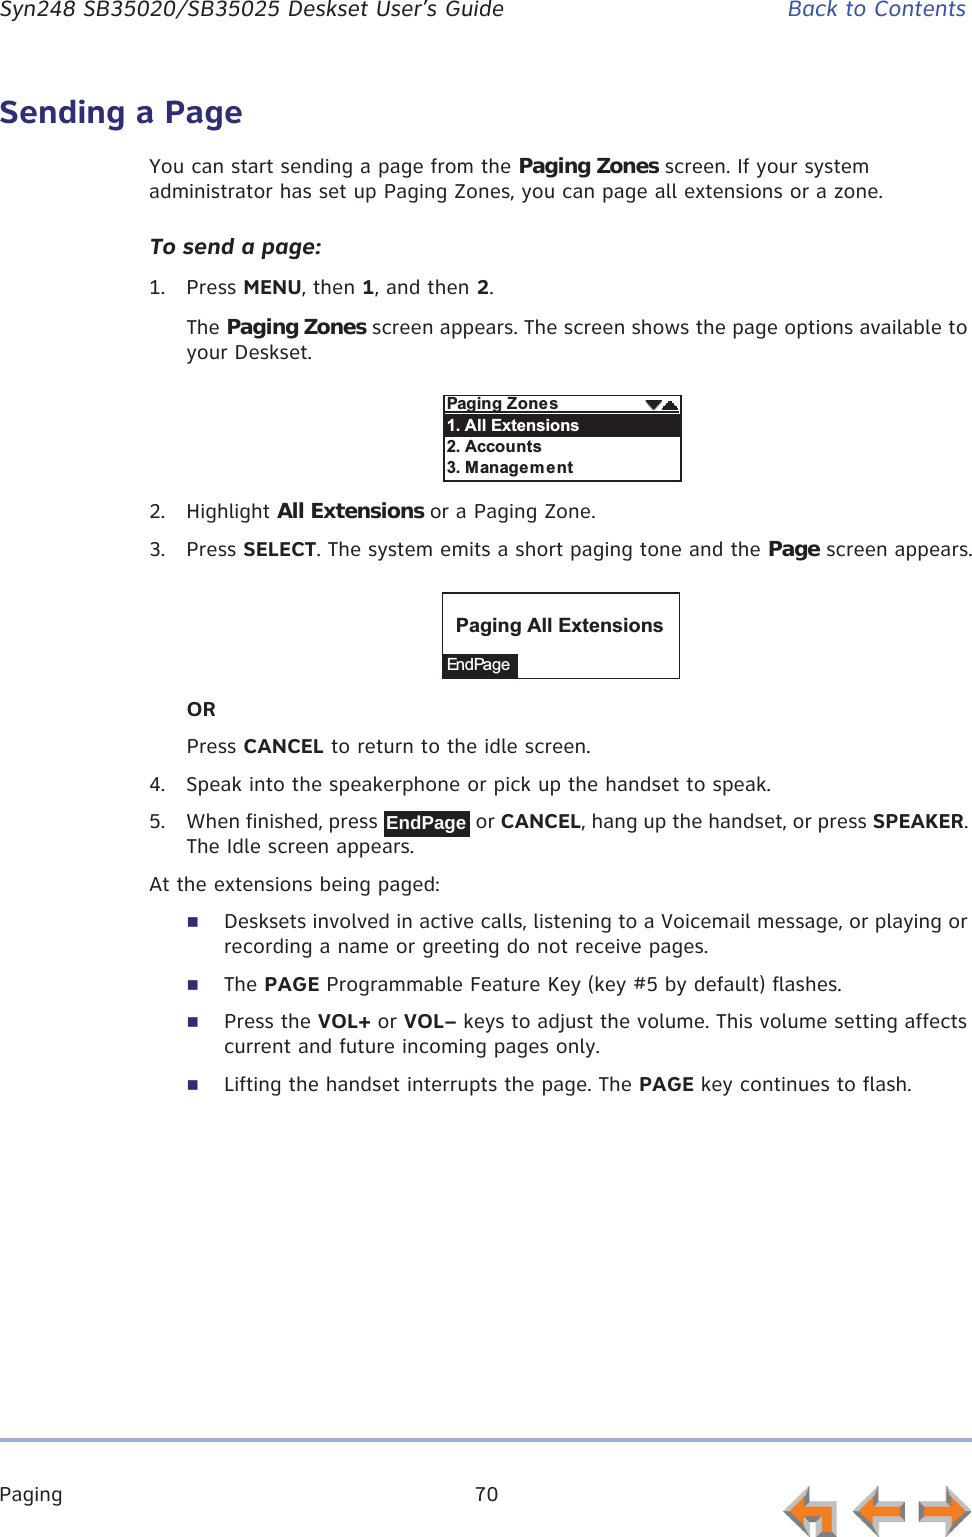 Paging 70      Syn248 SB35020/SB35025 Deskset User’s Guide Back to ContentsSending a PageYou can start sending a page from the Paging Zones screen. If your system administrator has set up Paging Zones, you can page all extensions or a zone. To send a page:1. Press MENU, then 1, and then 2.The Paging Zones screen appears. The screen shows the page options available to your Deskset.2. Highlight All Extensions or a Paging Zone.3. Press SELECT. The system emits a short paging tone and the Page screen appears.ORPress CANCEL to return to the idle screen.4. Speak into the speakerphone or pick up the handset to speak.5. When finished, press   or CANCEL, hang up the handset, or press SPEAKER. The Idle screen appears.At the extensions being paged:Desksets involved in active calls, listening to a Voicemail message, or playing or recording a name or greeting do not receive pages.The PAGE Programmable Feature Key (key #5 by default) flashes.Press the VOL+ or VOL– keys to adjust the volume. This volume setting affects current and future incoming pages only.Lifting the handset interrupts the page. The PAGE key continues to flash.$&quot;$B&quot;%-&lt;,&quot;%&quot;%-&lt;C&quot;%-=&quot;$&quot;En d Pa g e$&quot;$&lt;,&quot;%&quot;%EndPage